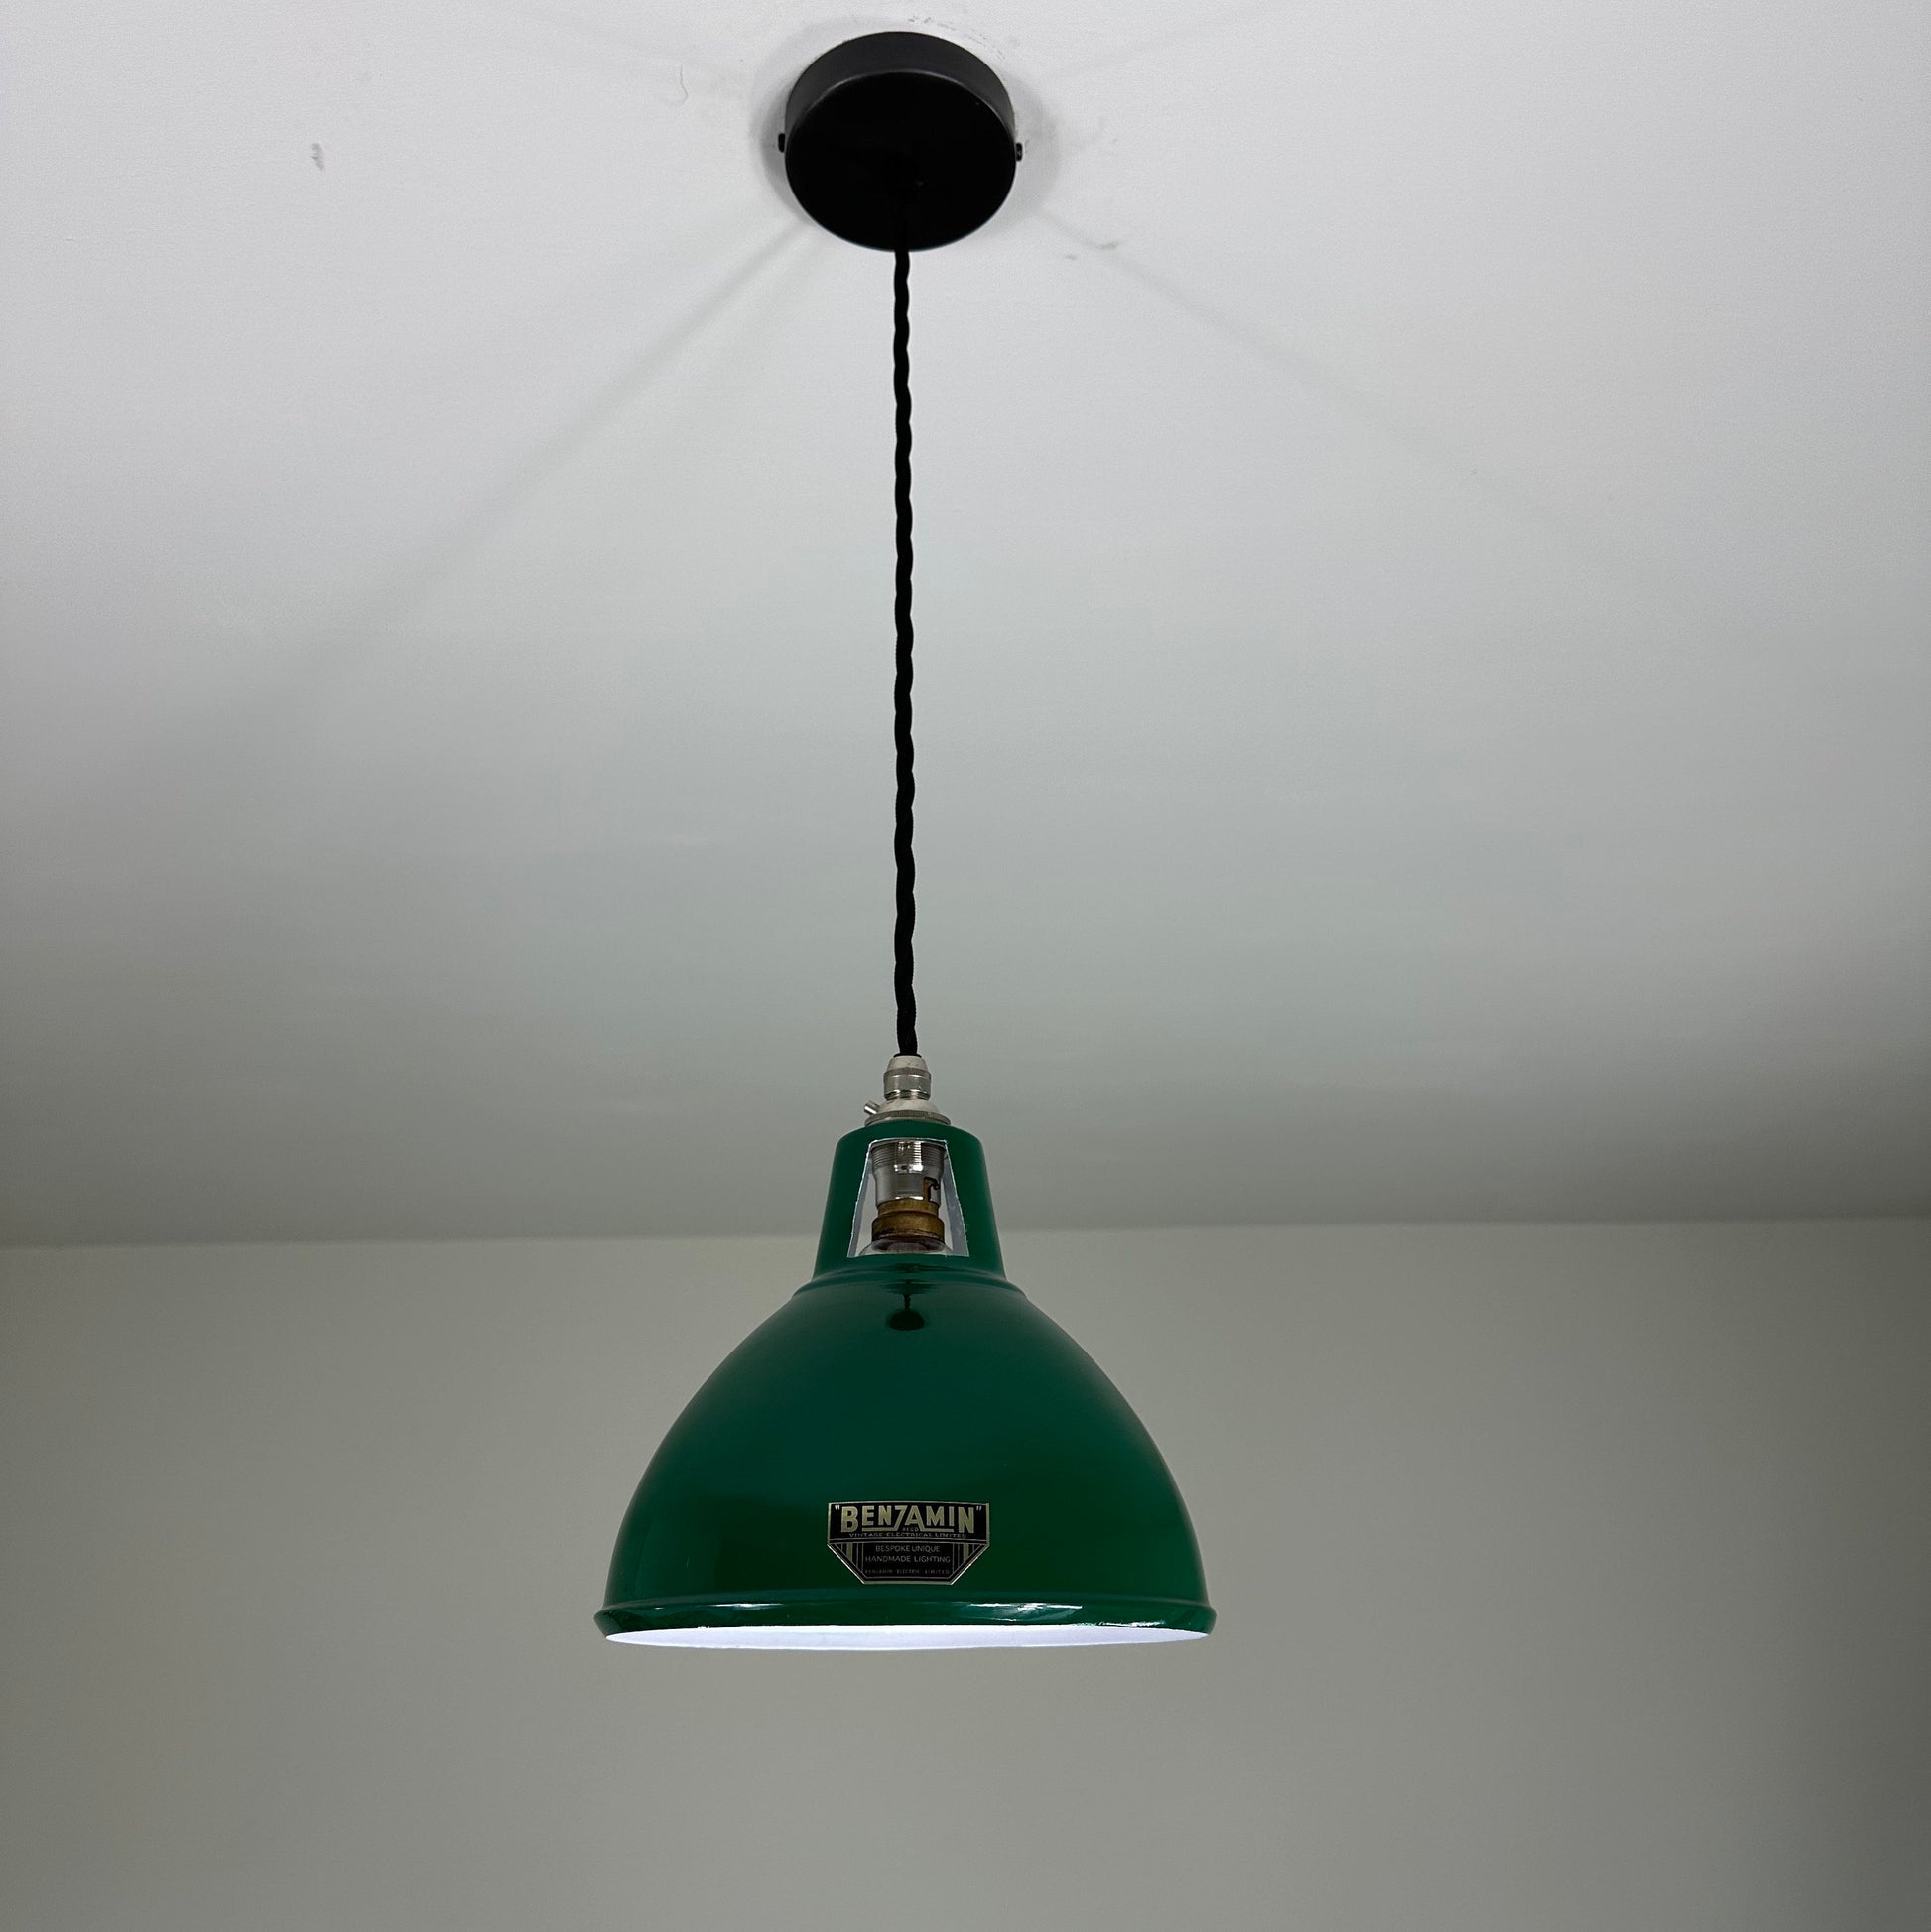 Shropham ~ Small Racing Green Solid Shade Design Pendant Set Light | Ceiling Dining Room | Kitchen Table | Vintage Industrial | 8 Inch